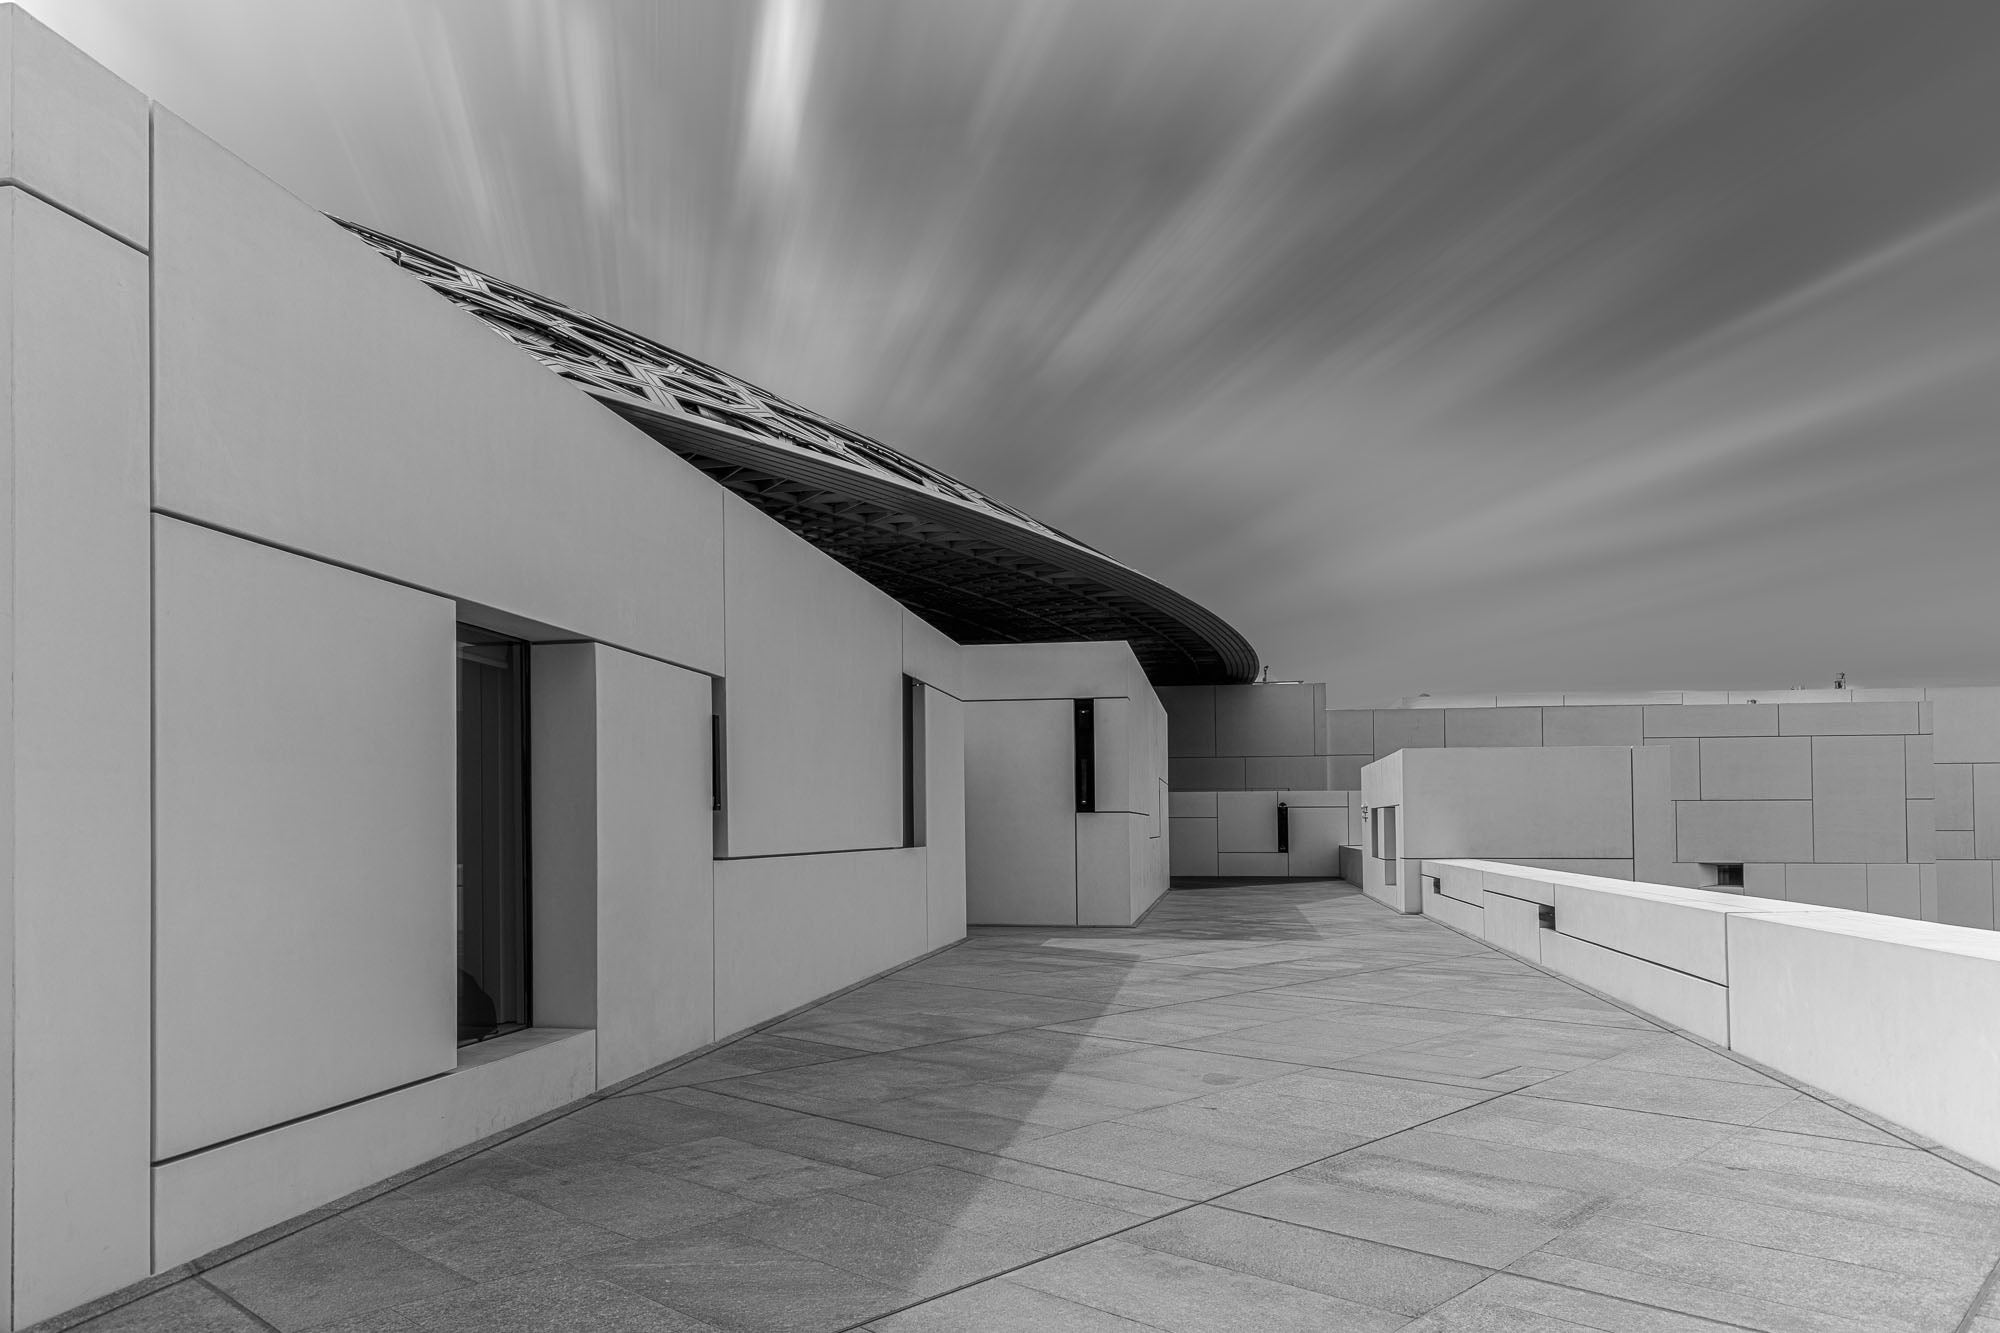 A long exposure black and white image of the Louvre Abu Dhabi showing the sharp angles of the museum's architecture against the smooth streaks of clouds in the sky.